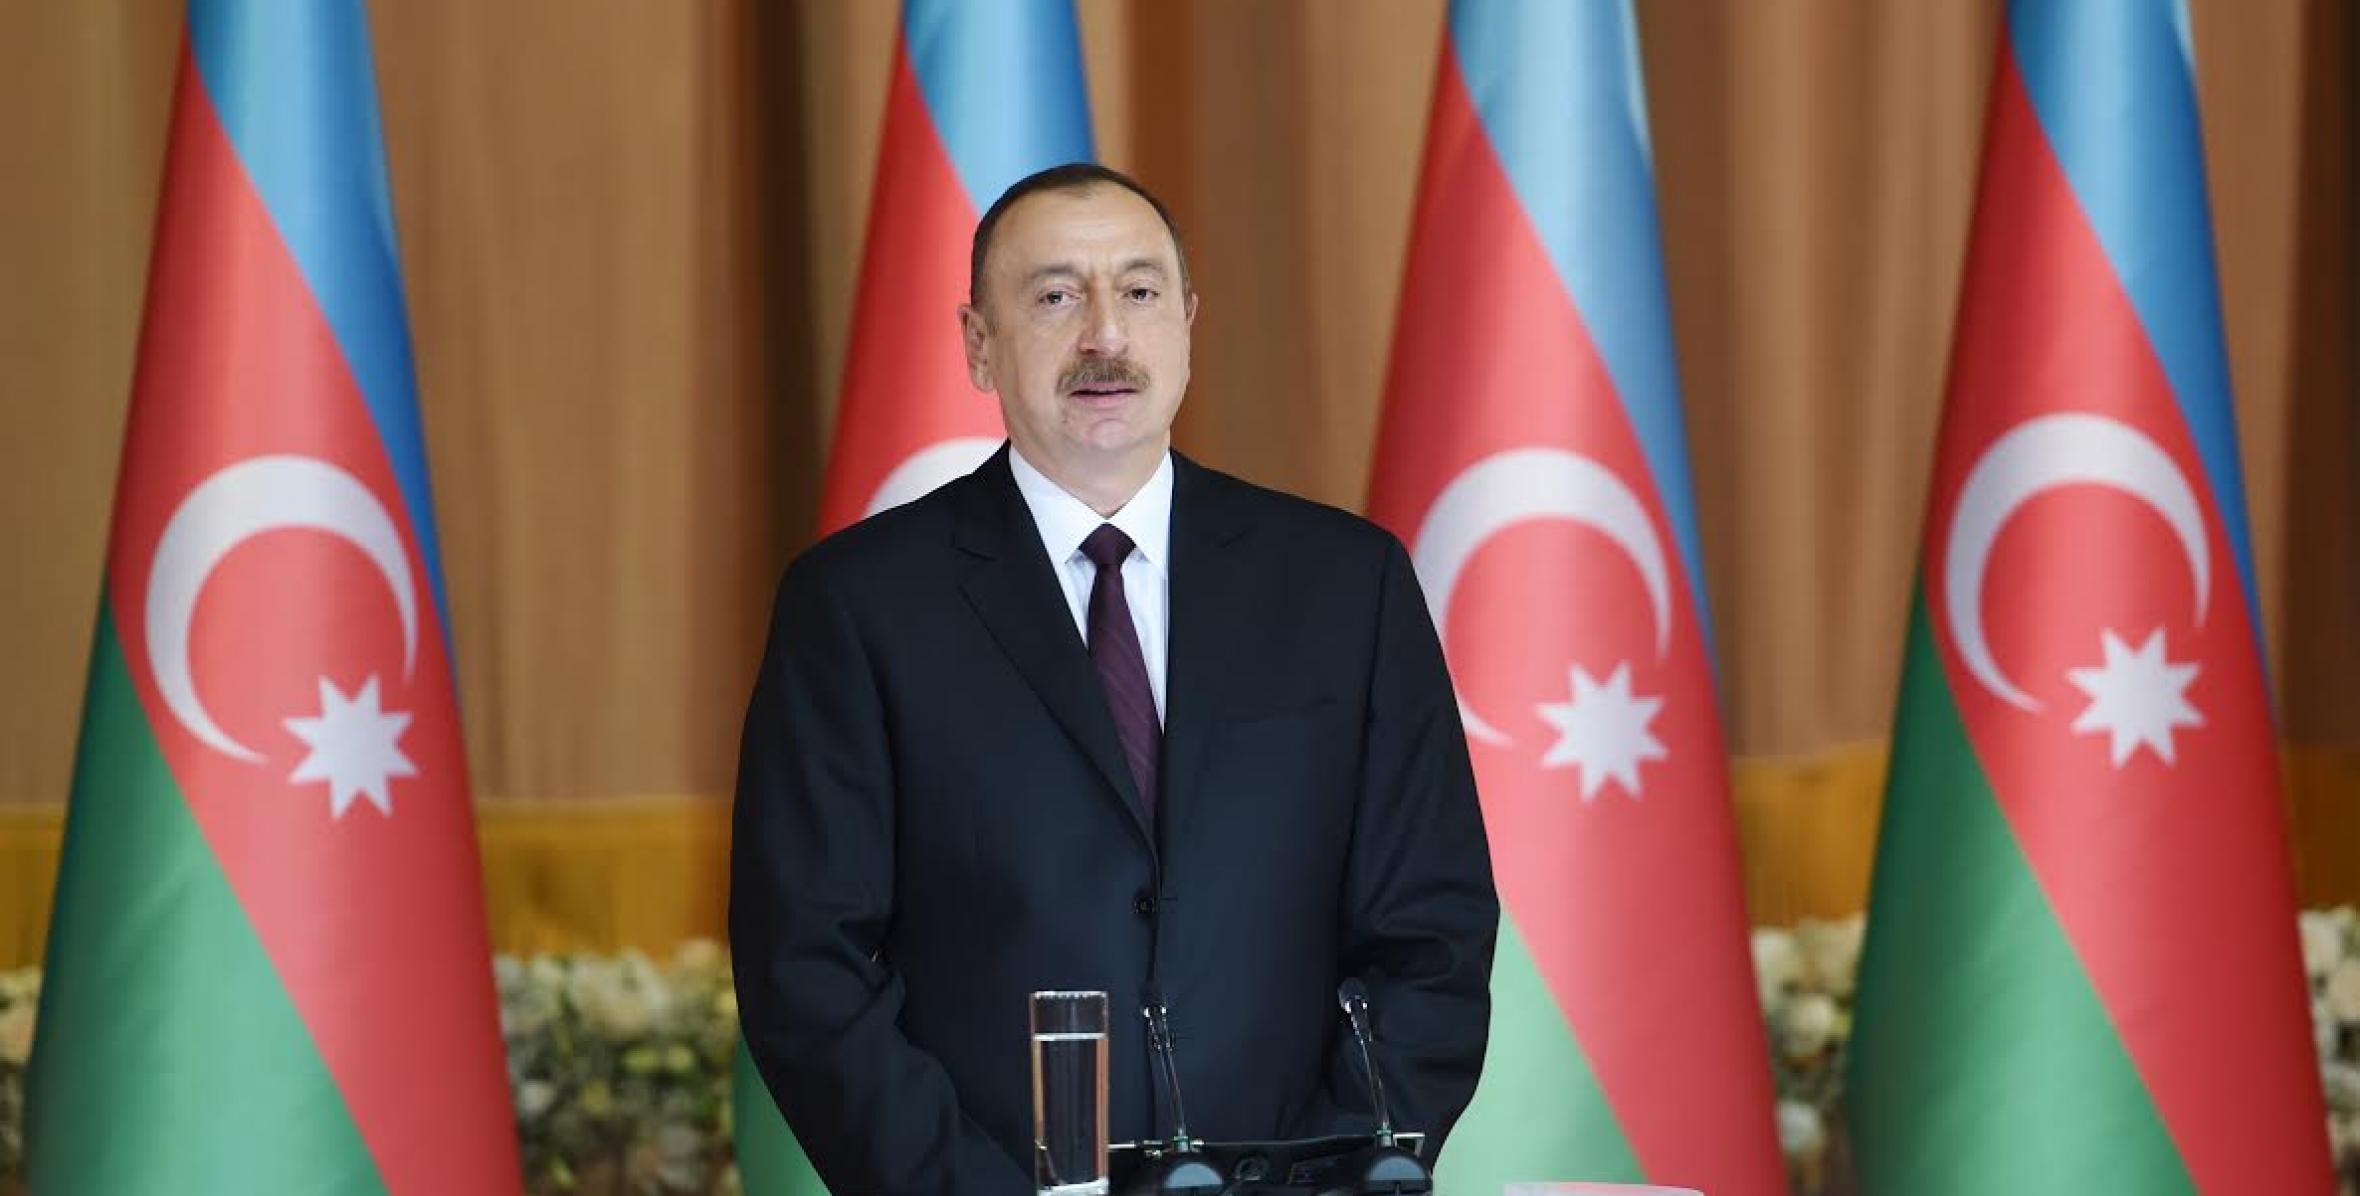 Speech by Ilham Aliyev at the official reception on the occasion of the Republic Day